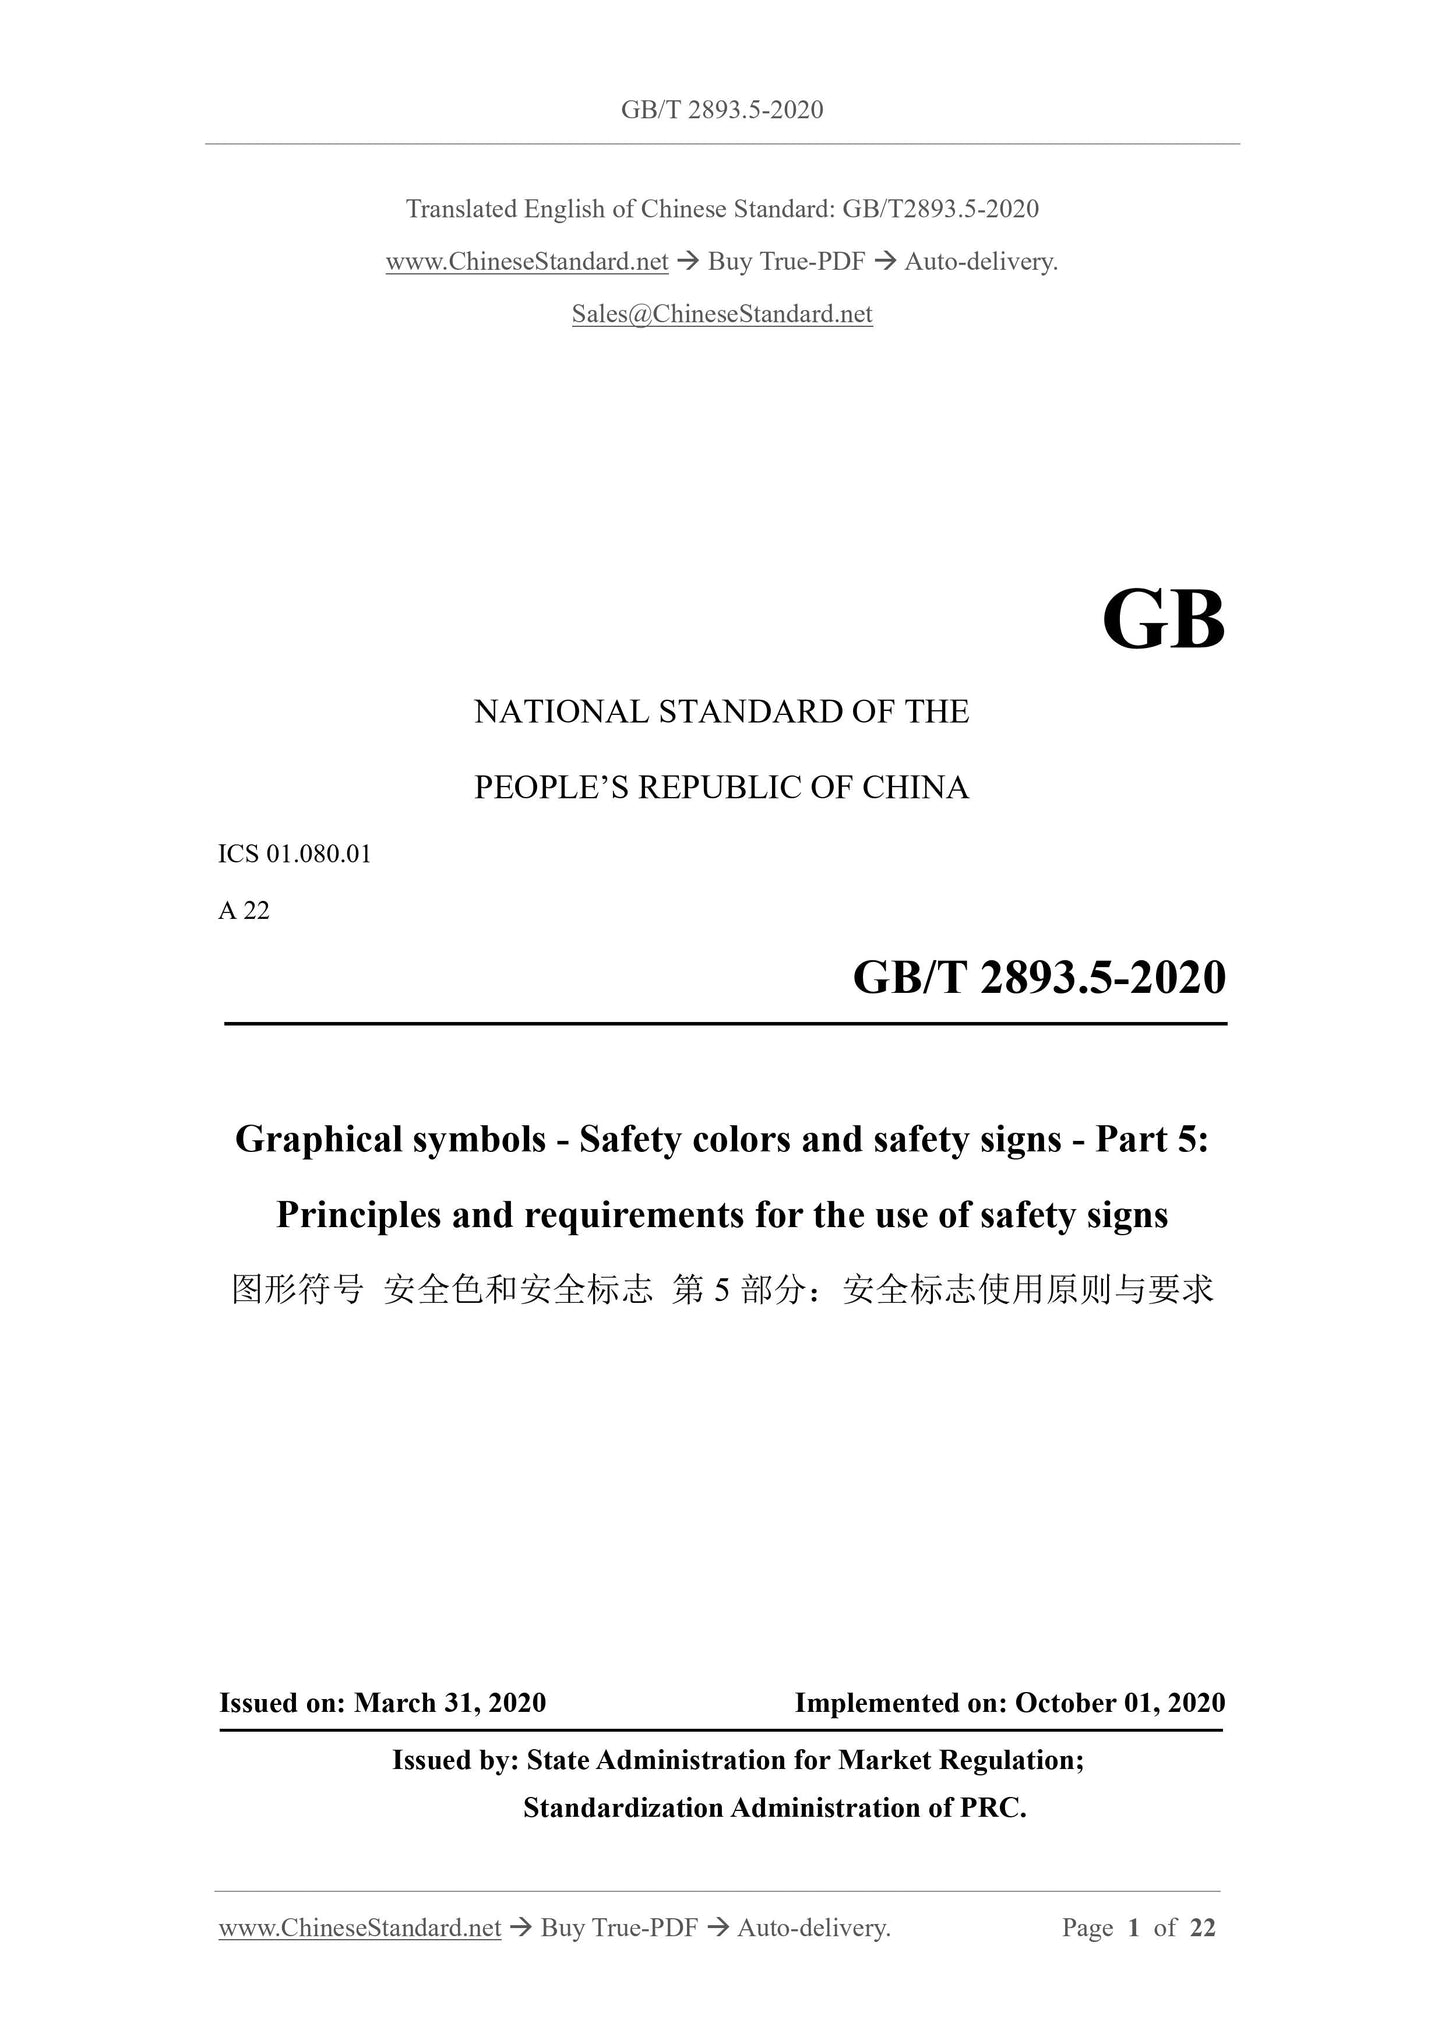 GB/T 2893.5-2020 Page 1